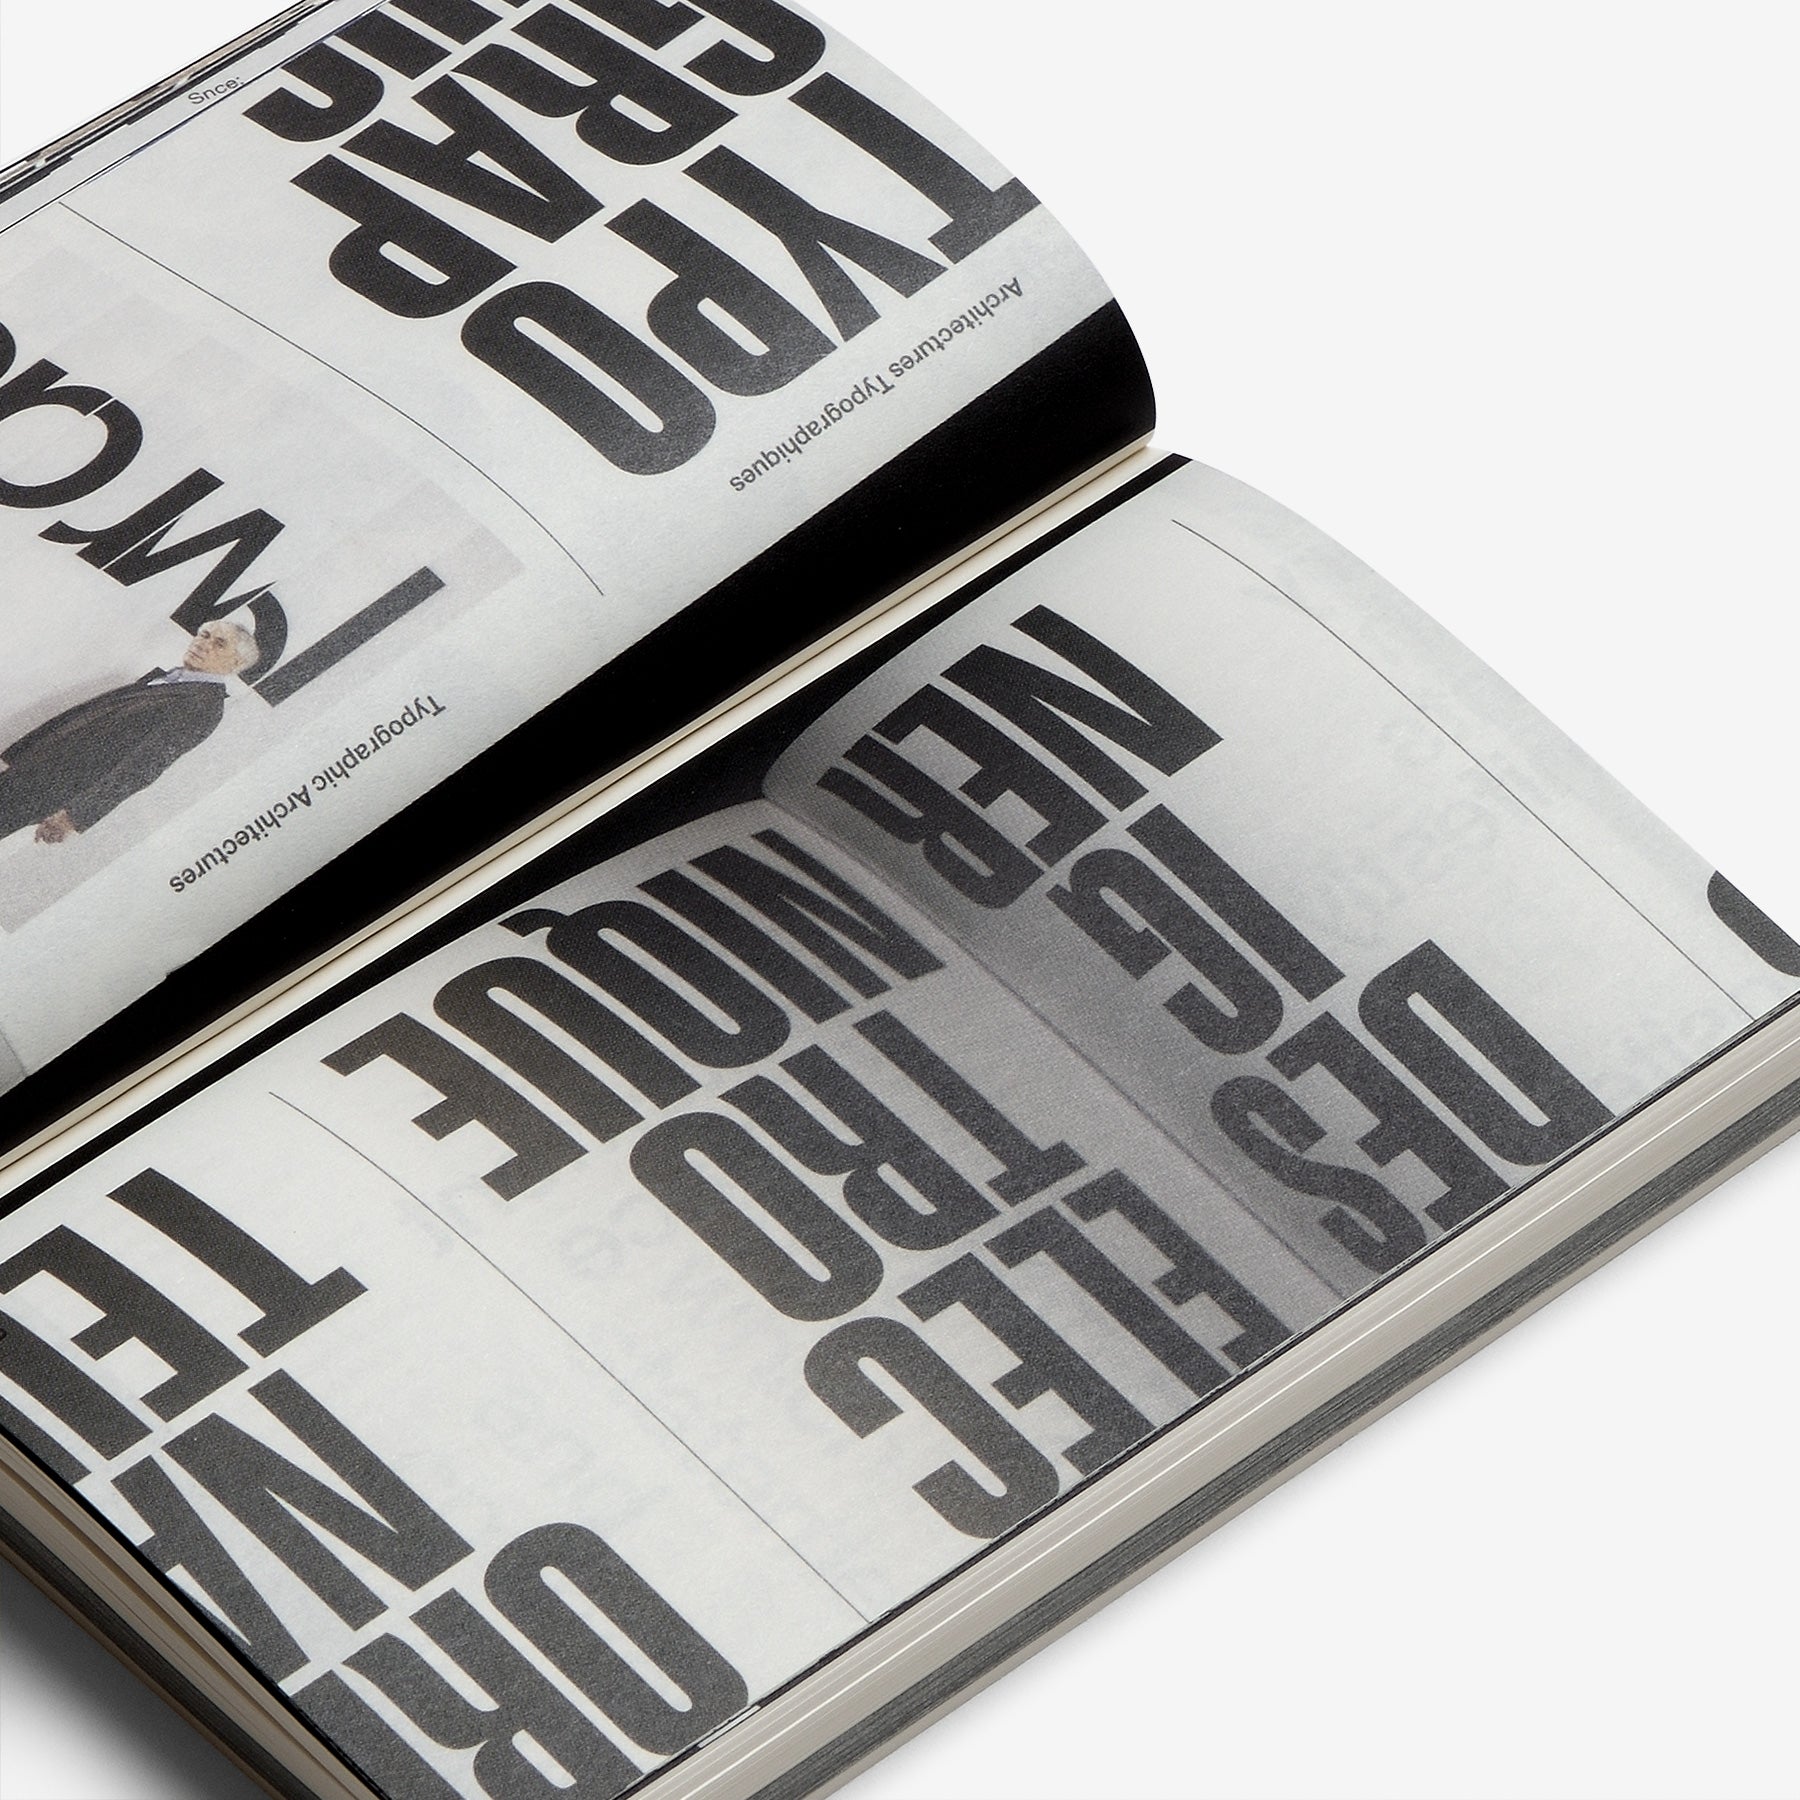 Statement and Counter-Statement: Notes on Experimental Jetset New Ed.